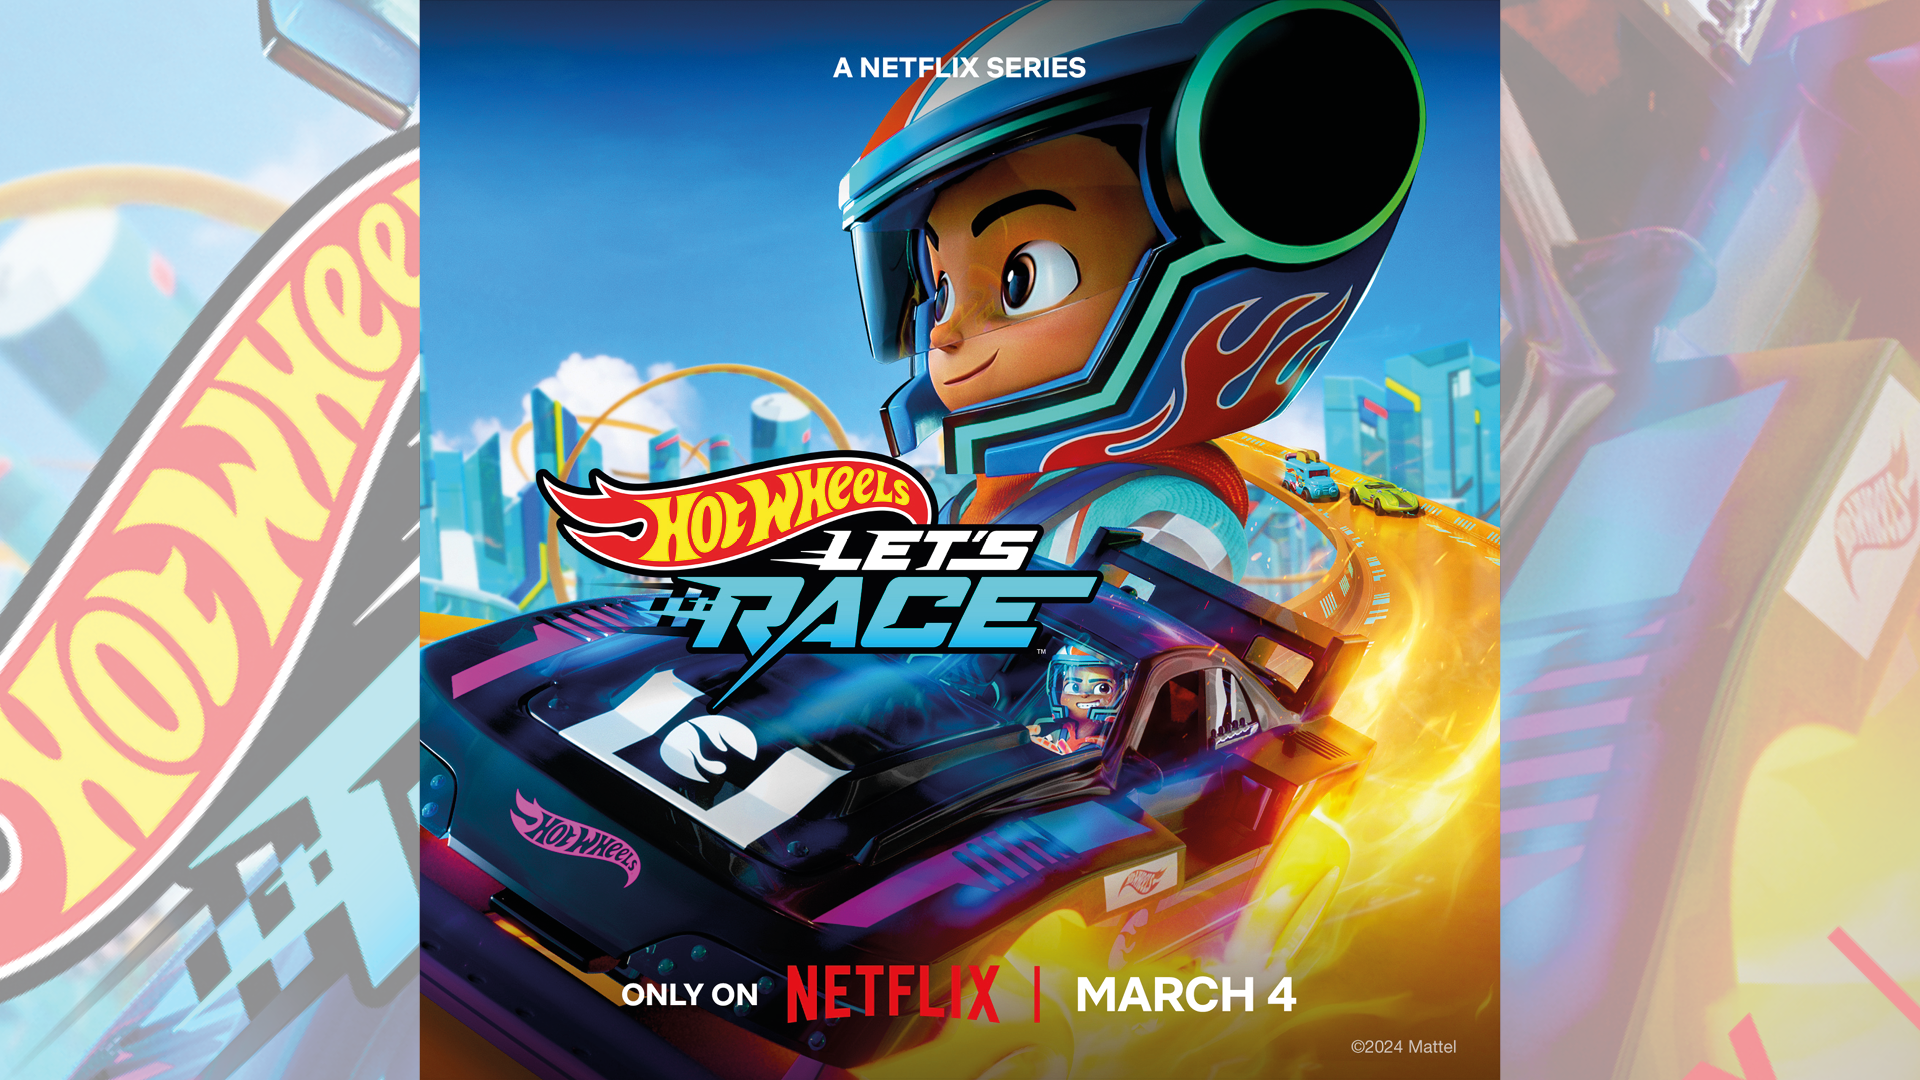 Hot Wheels Let's Race' to Debut on Netflix